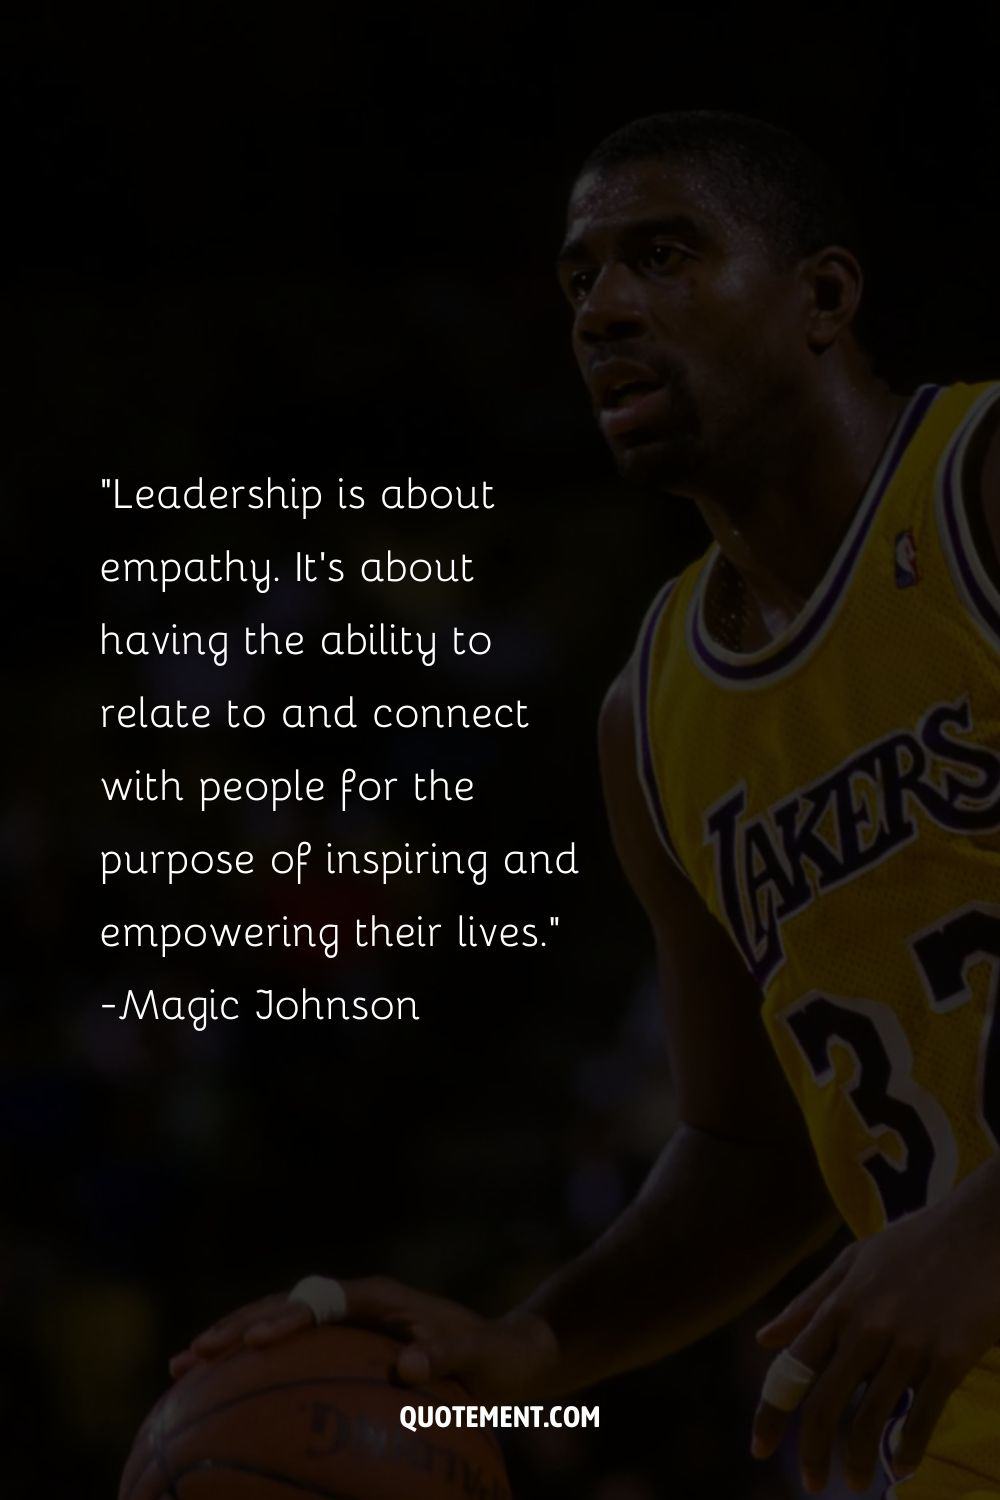 Leadership is about empathy.